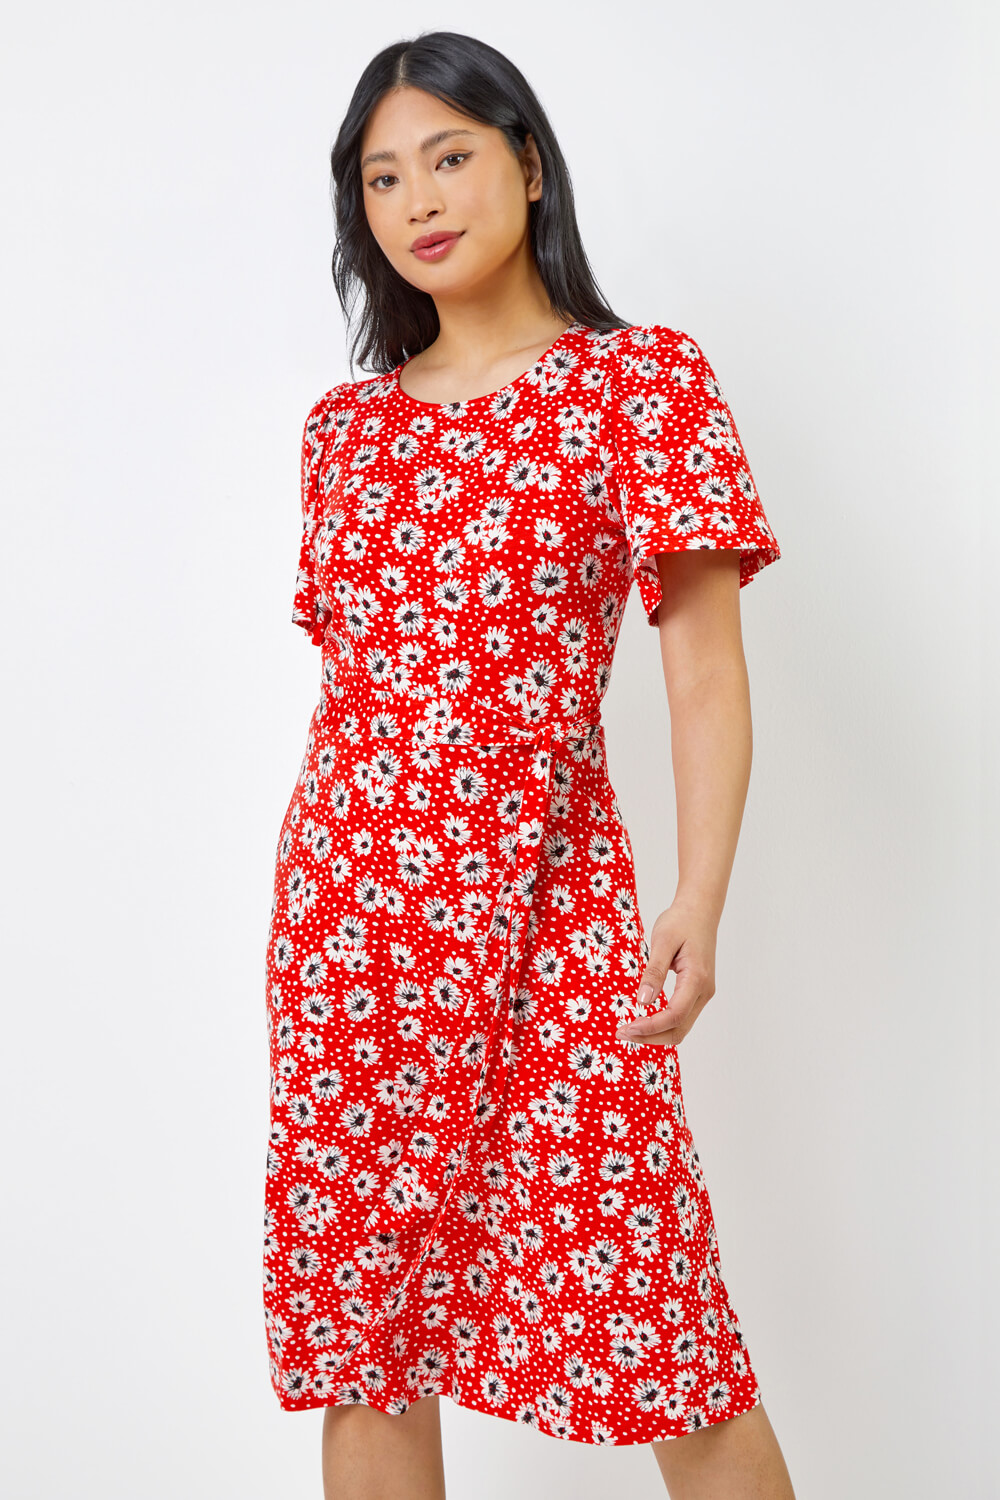 Red Petite Floral Print Jersey Dress, Image 3 of 5